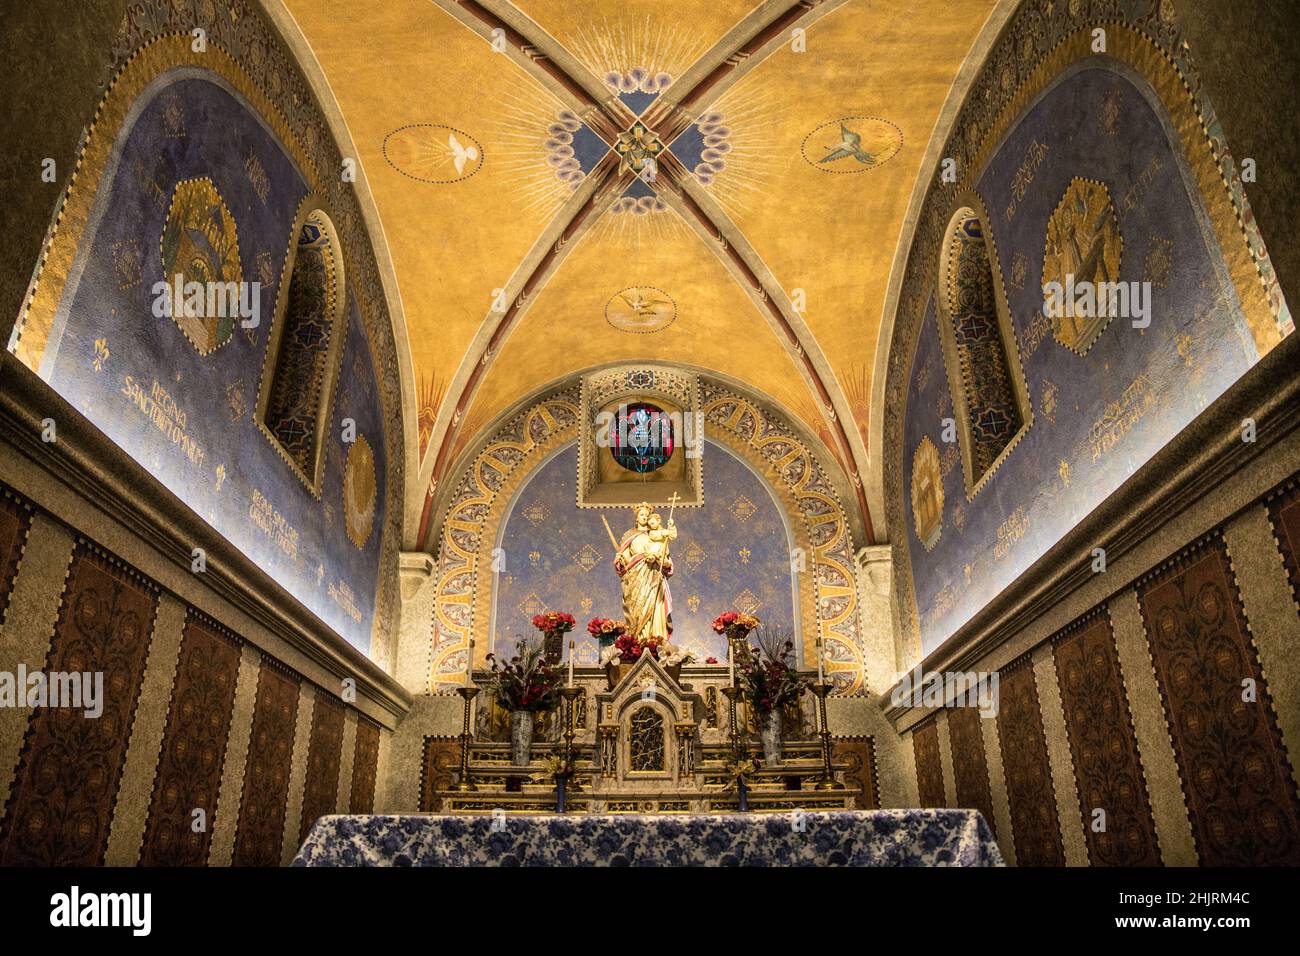 Exploring the Shrine of Monte Cassino and taking in the beautiful architecture and imagery in the room. Stock Photo